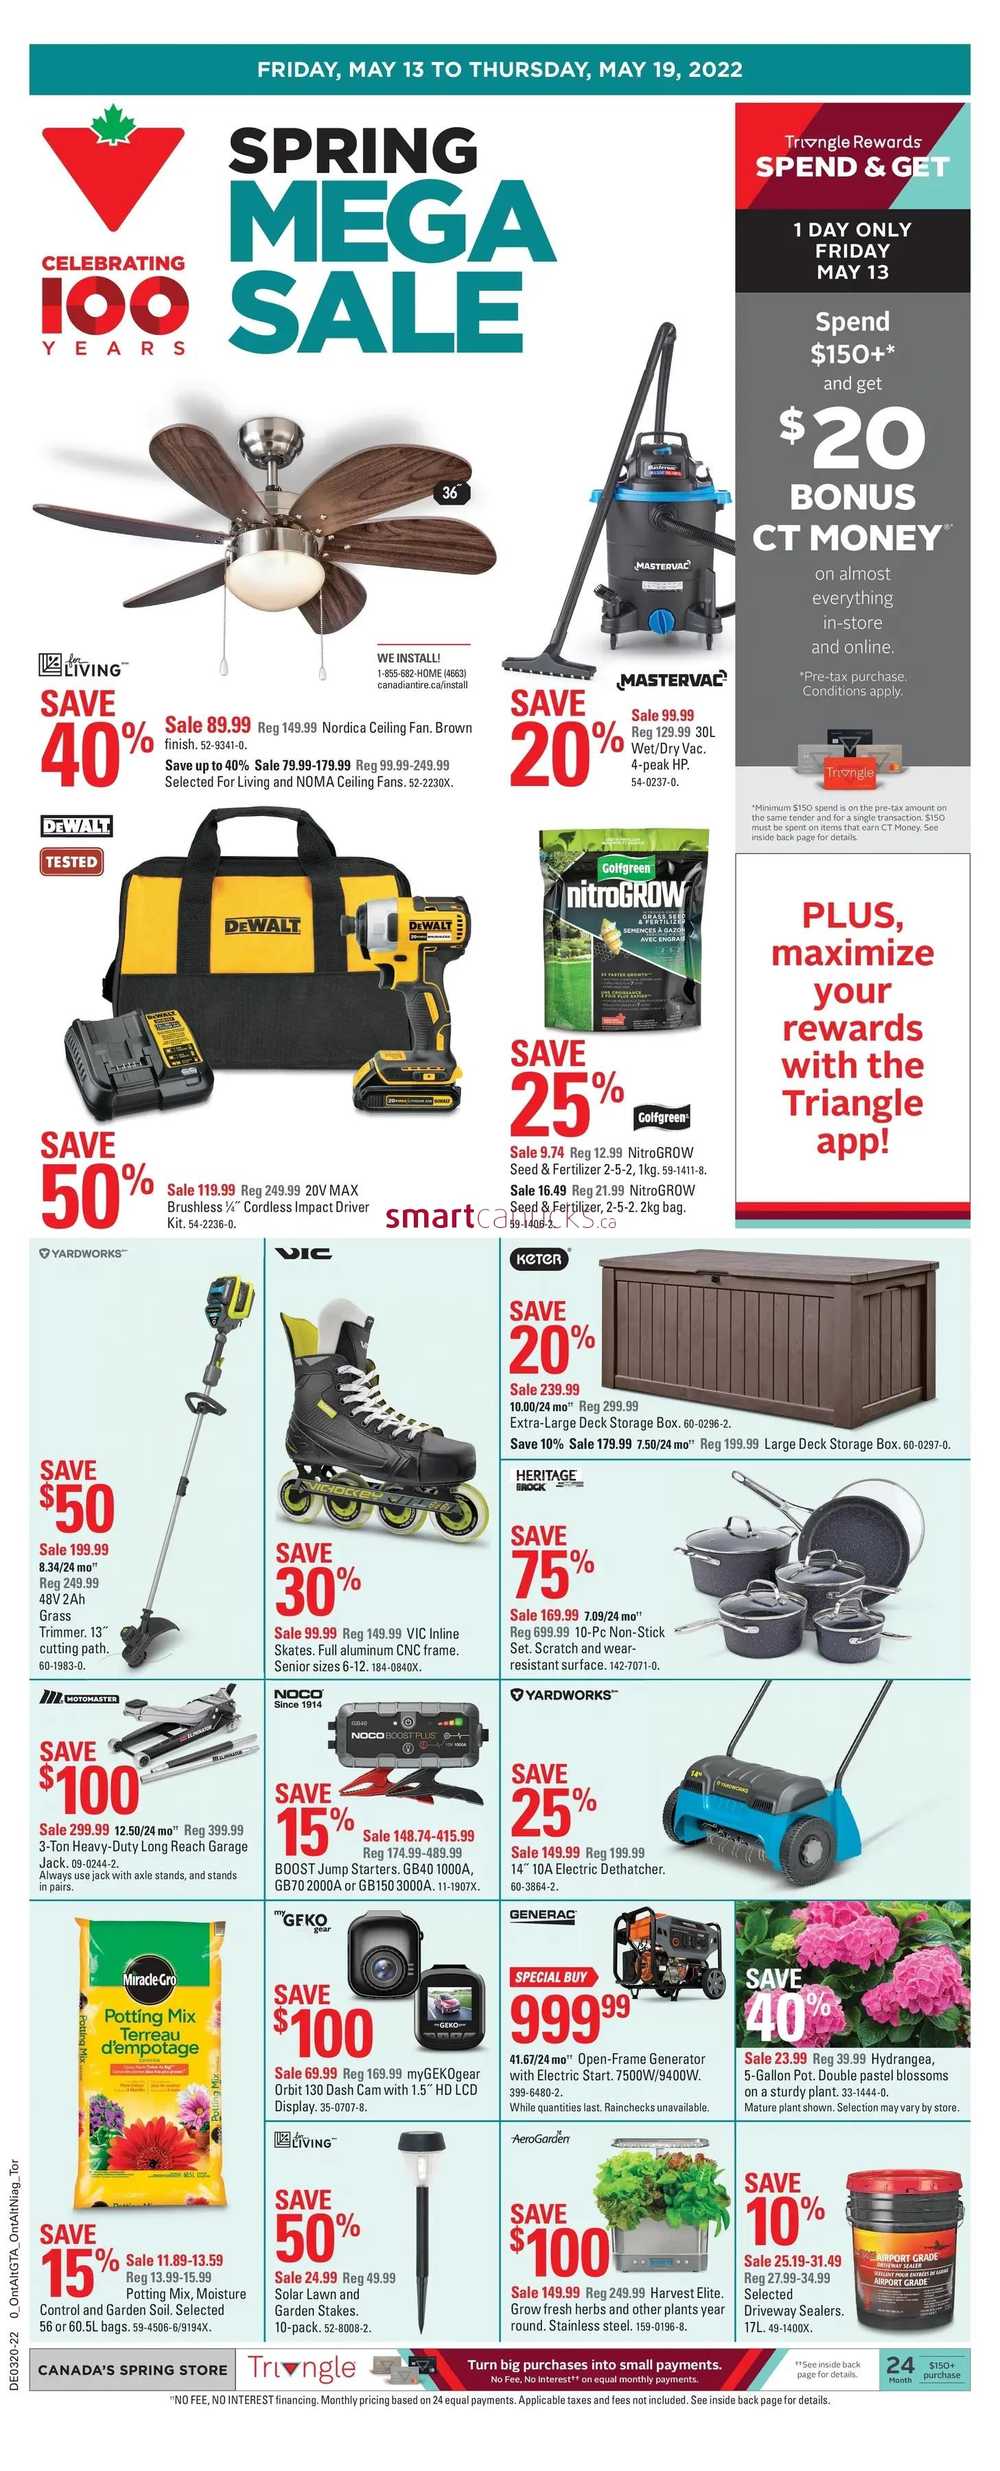 Canadian Tire Discount